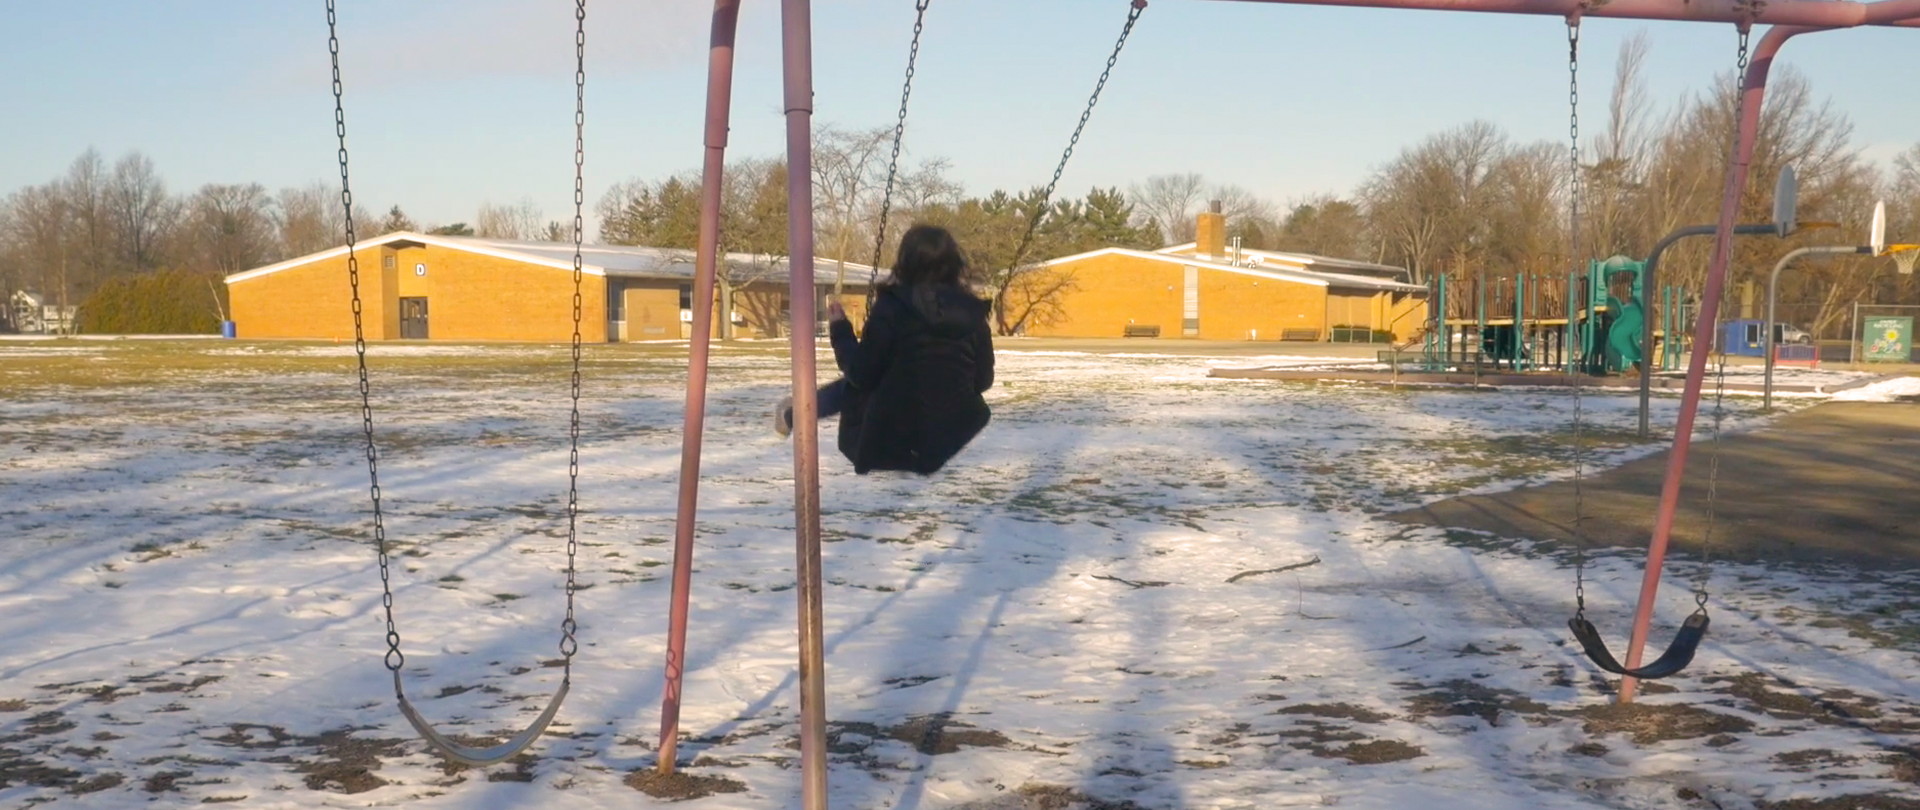 Jordyn on a swing seen from the back, in a school yard field covered with snow 